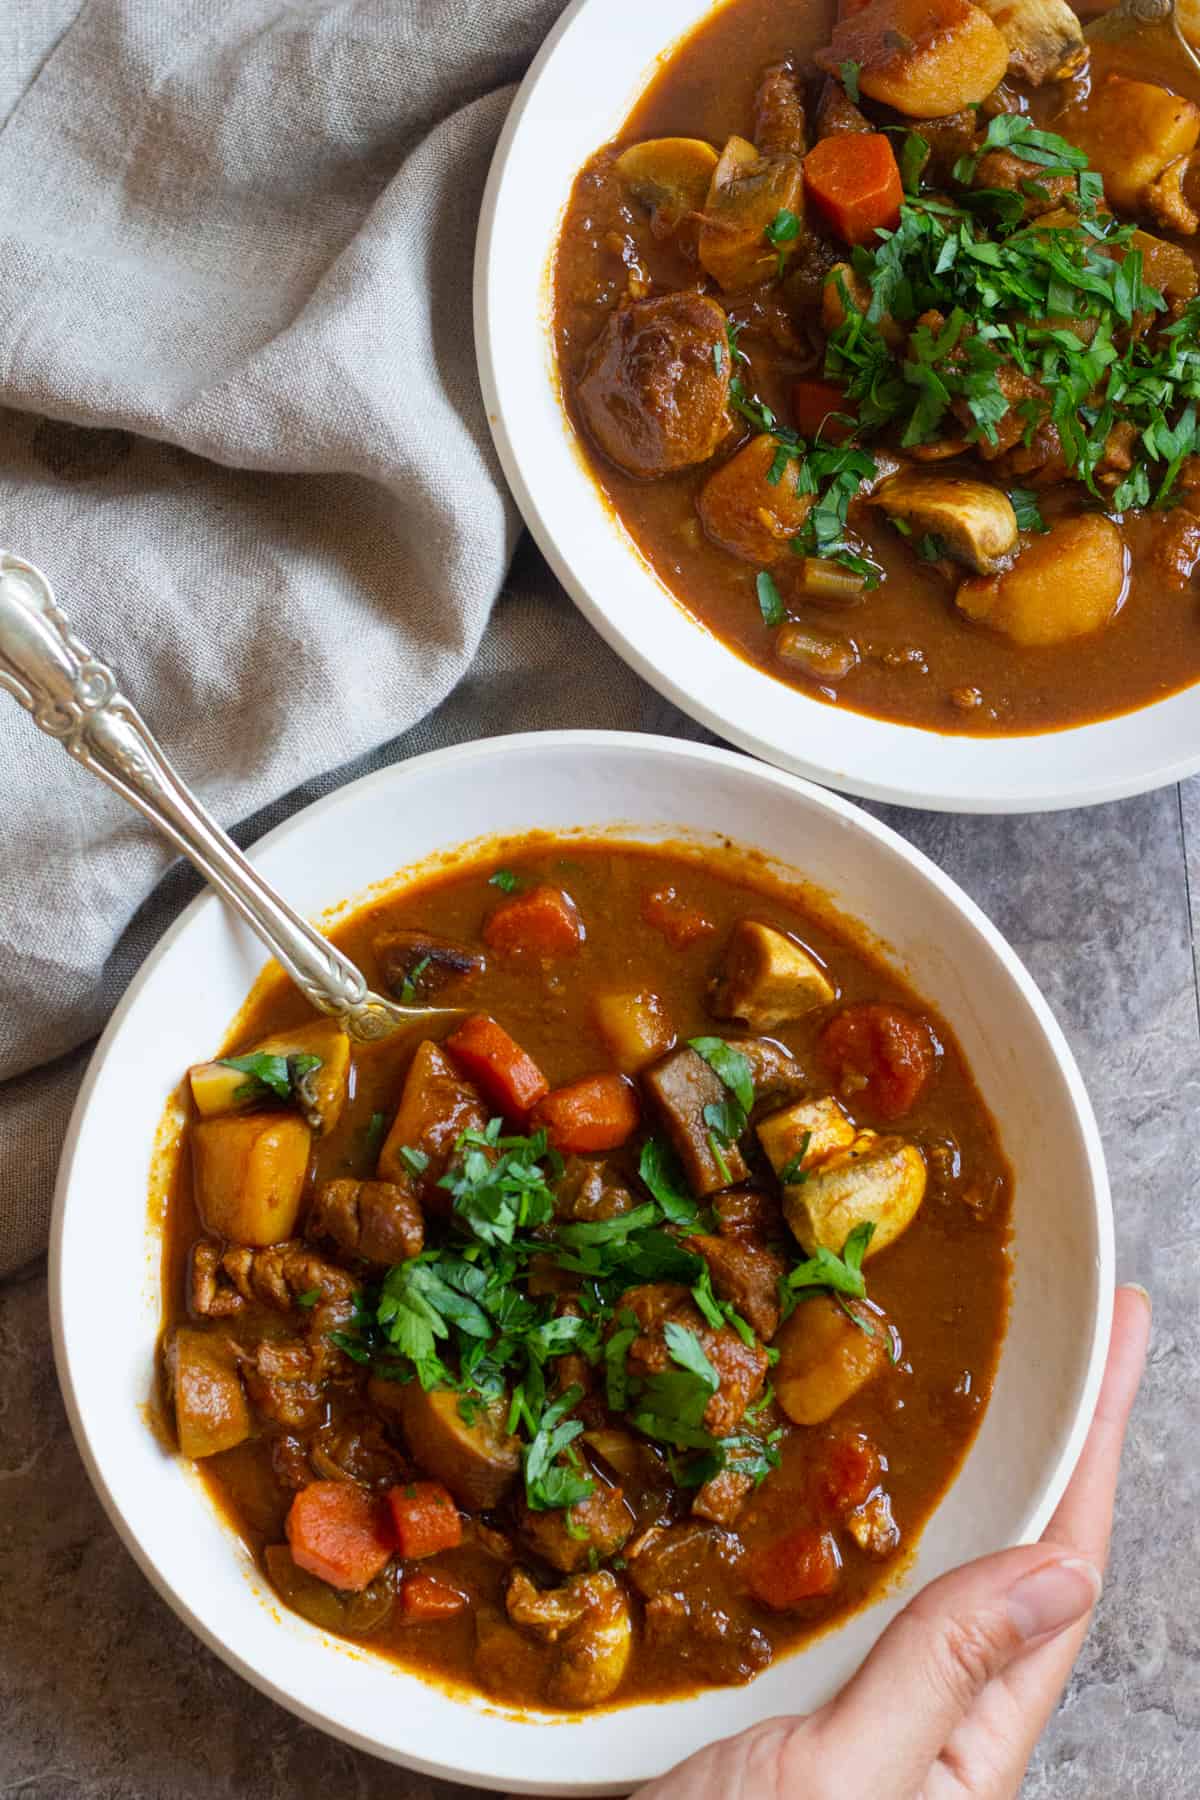 This easy lamb stew is filled with healthy and tasty ingredients. A one pot lamb stew with minimum preparation time is perfect for family meals.